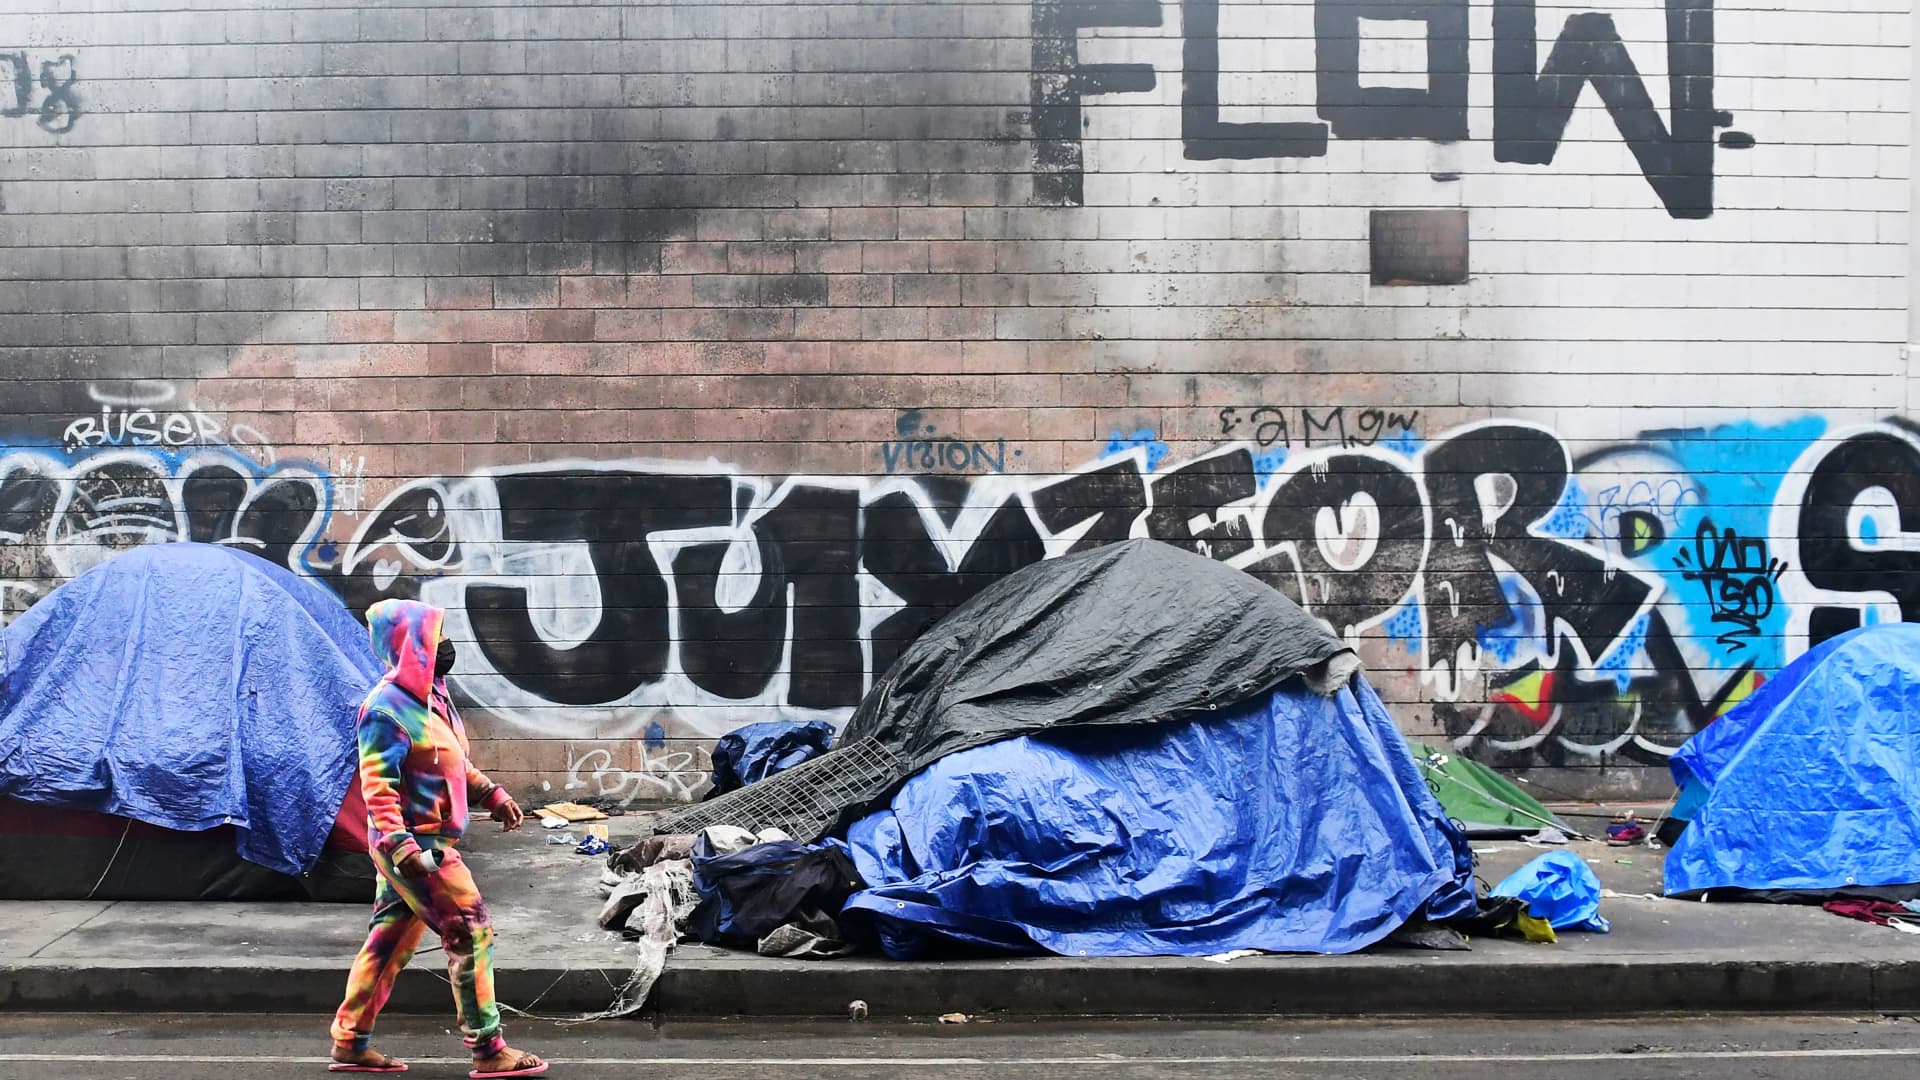 Los Angeles is using AI in a pilot program to try to predict homelessness and allocate aid